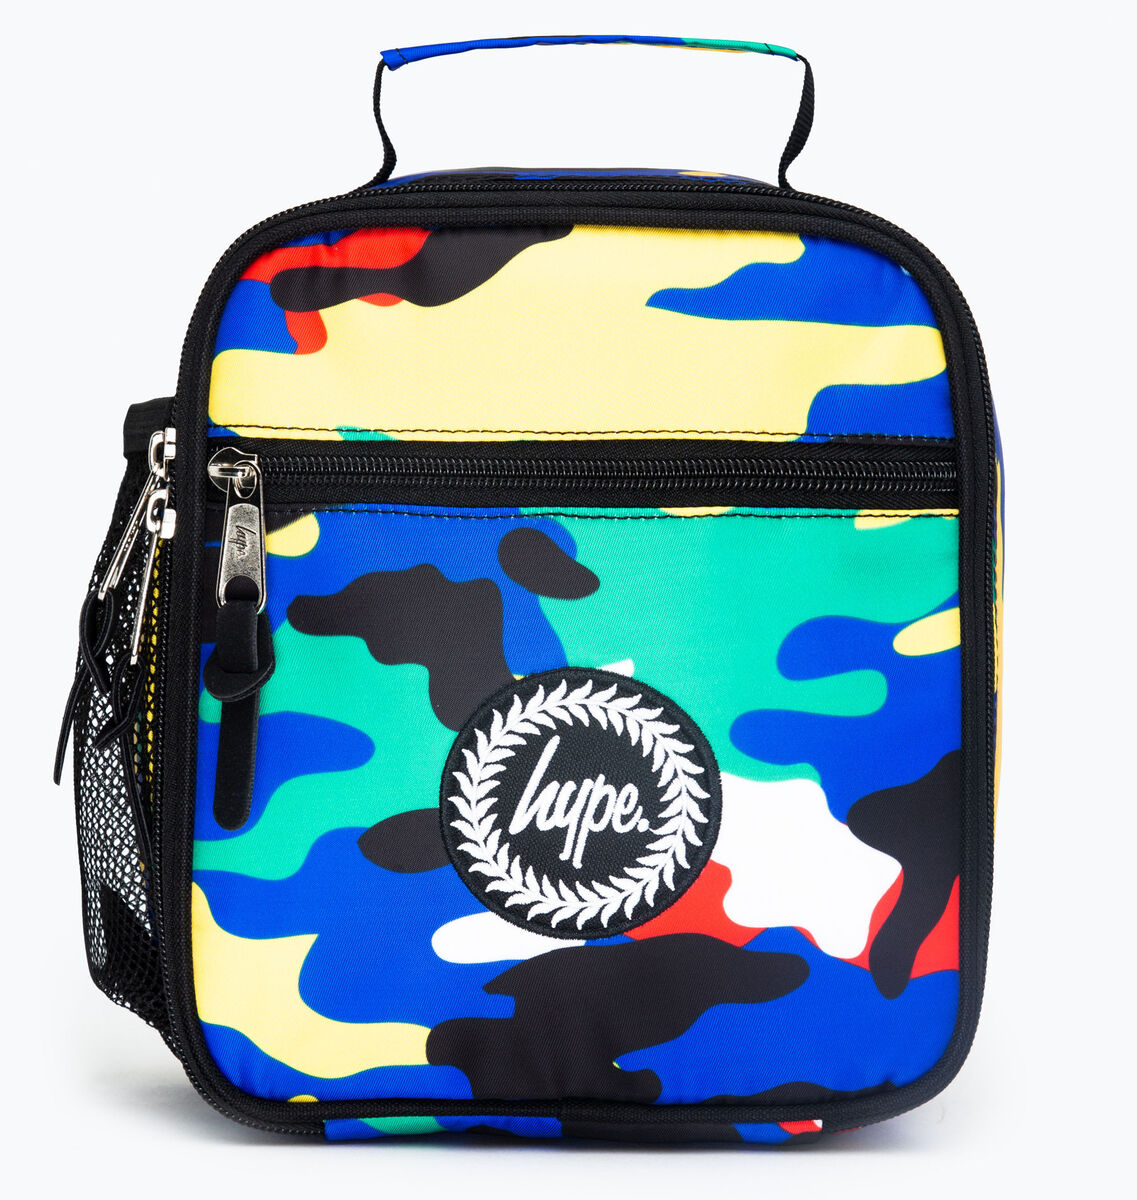 HYPE Lunchbox 4L, Primary Camo